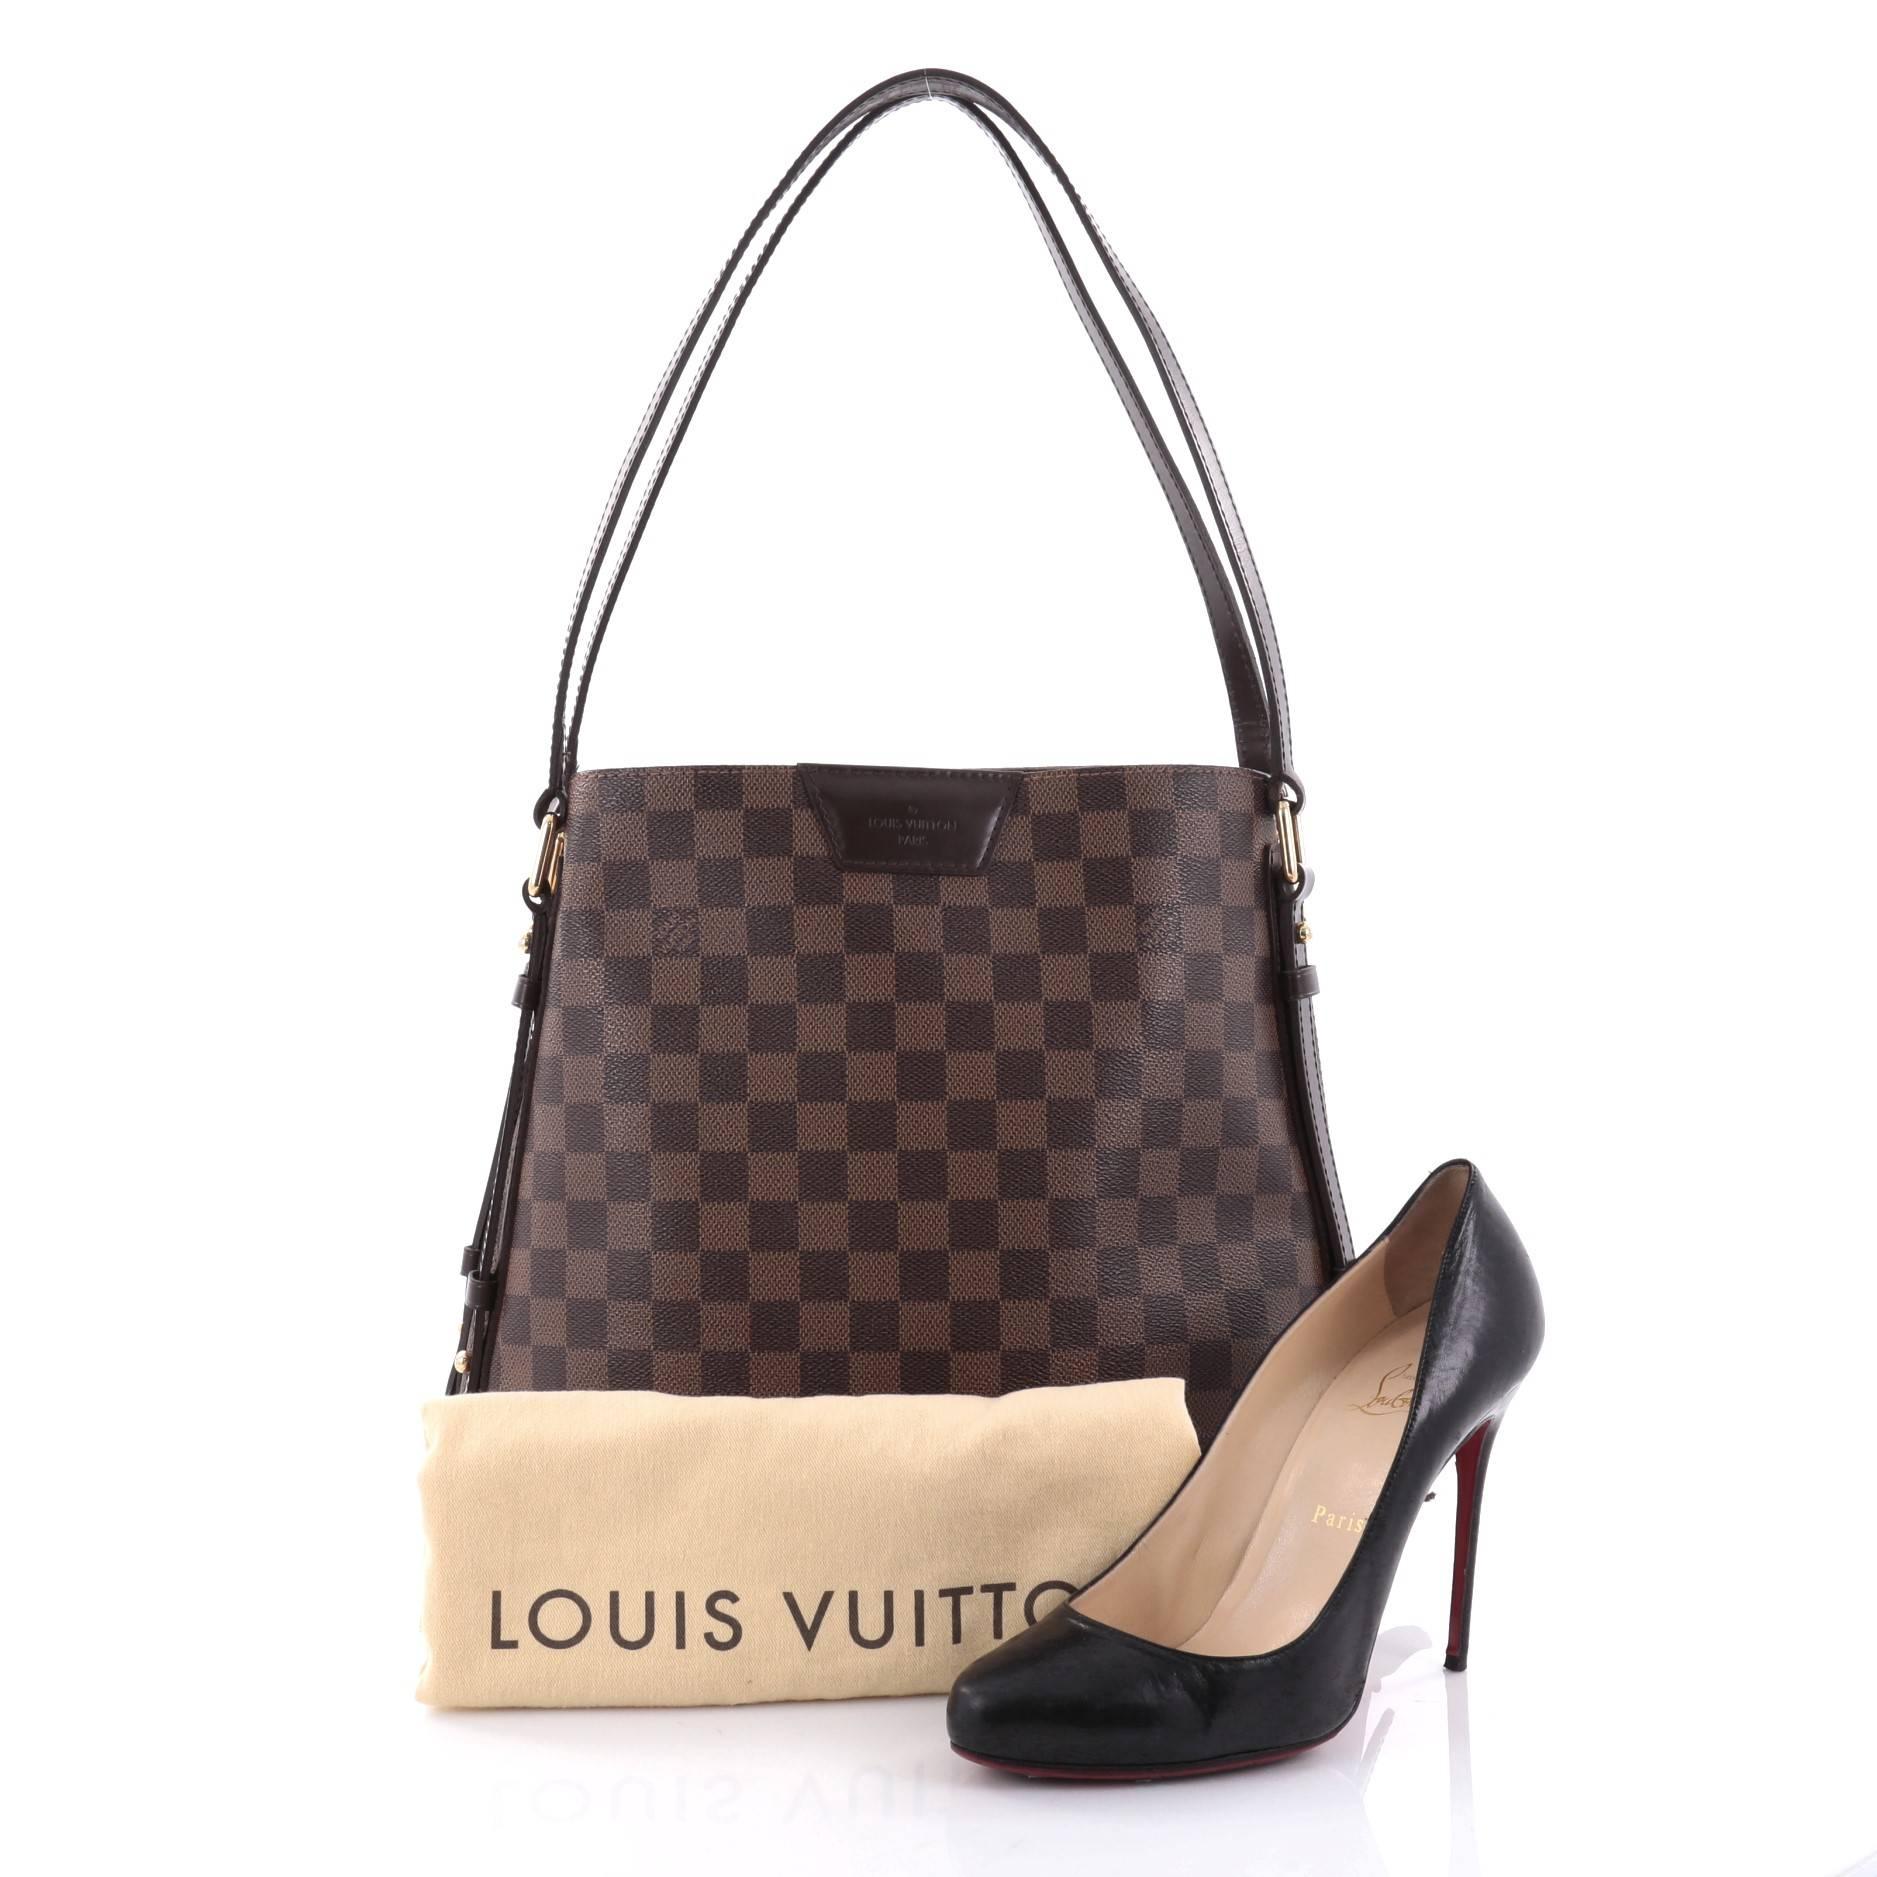 This authentic Louis Vuitton Cabas Rivington Damier has fashion and functionality both rolled into one. Crafted from damier ebene coated canvas with smooth chocolate leather trims, this chic bag features dual flat-leather handles, two side zippers